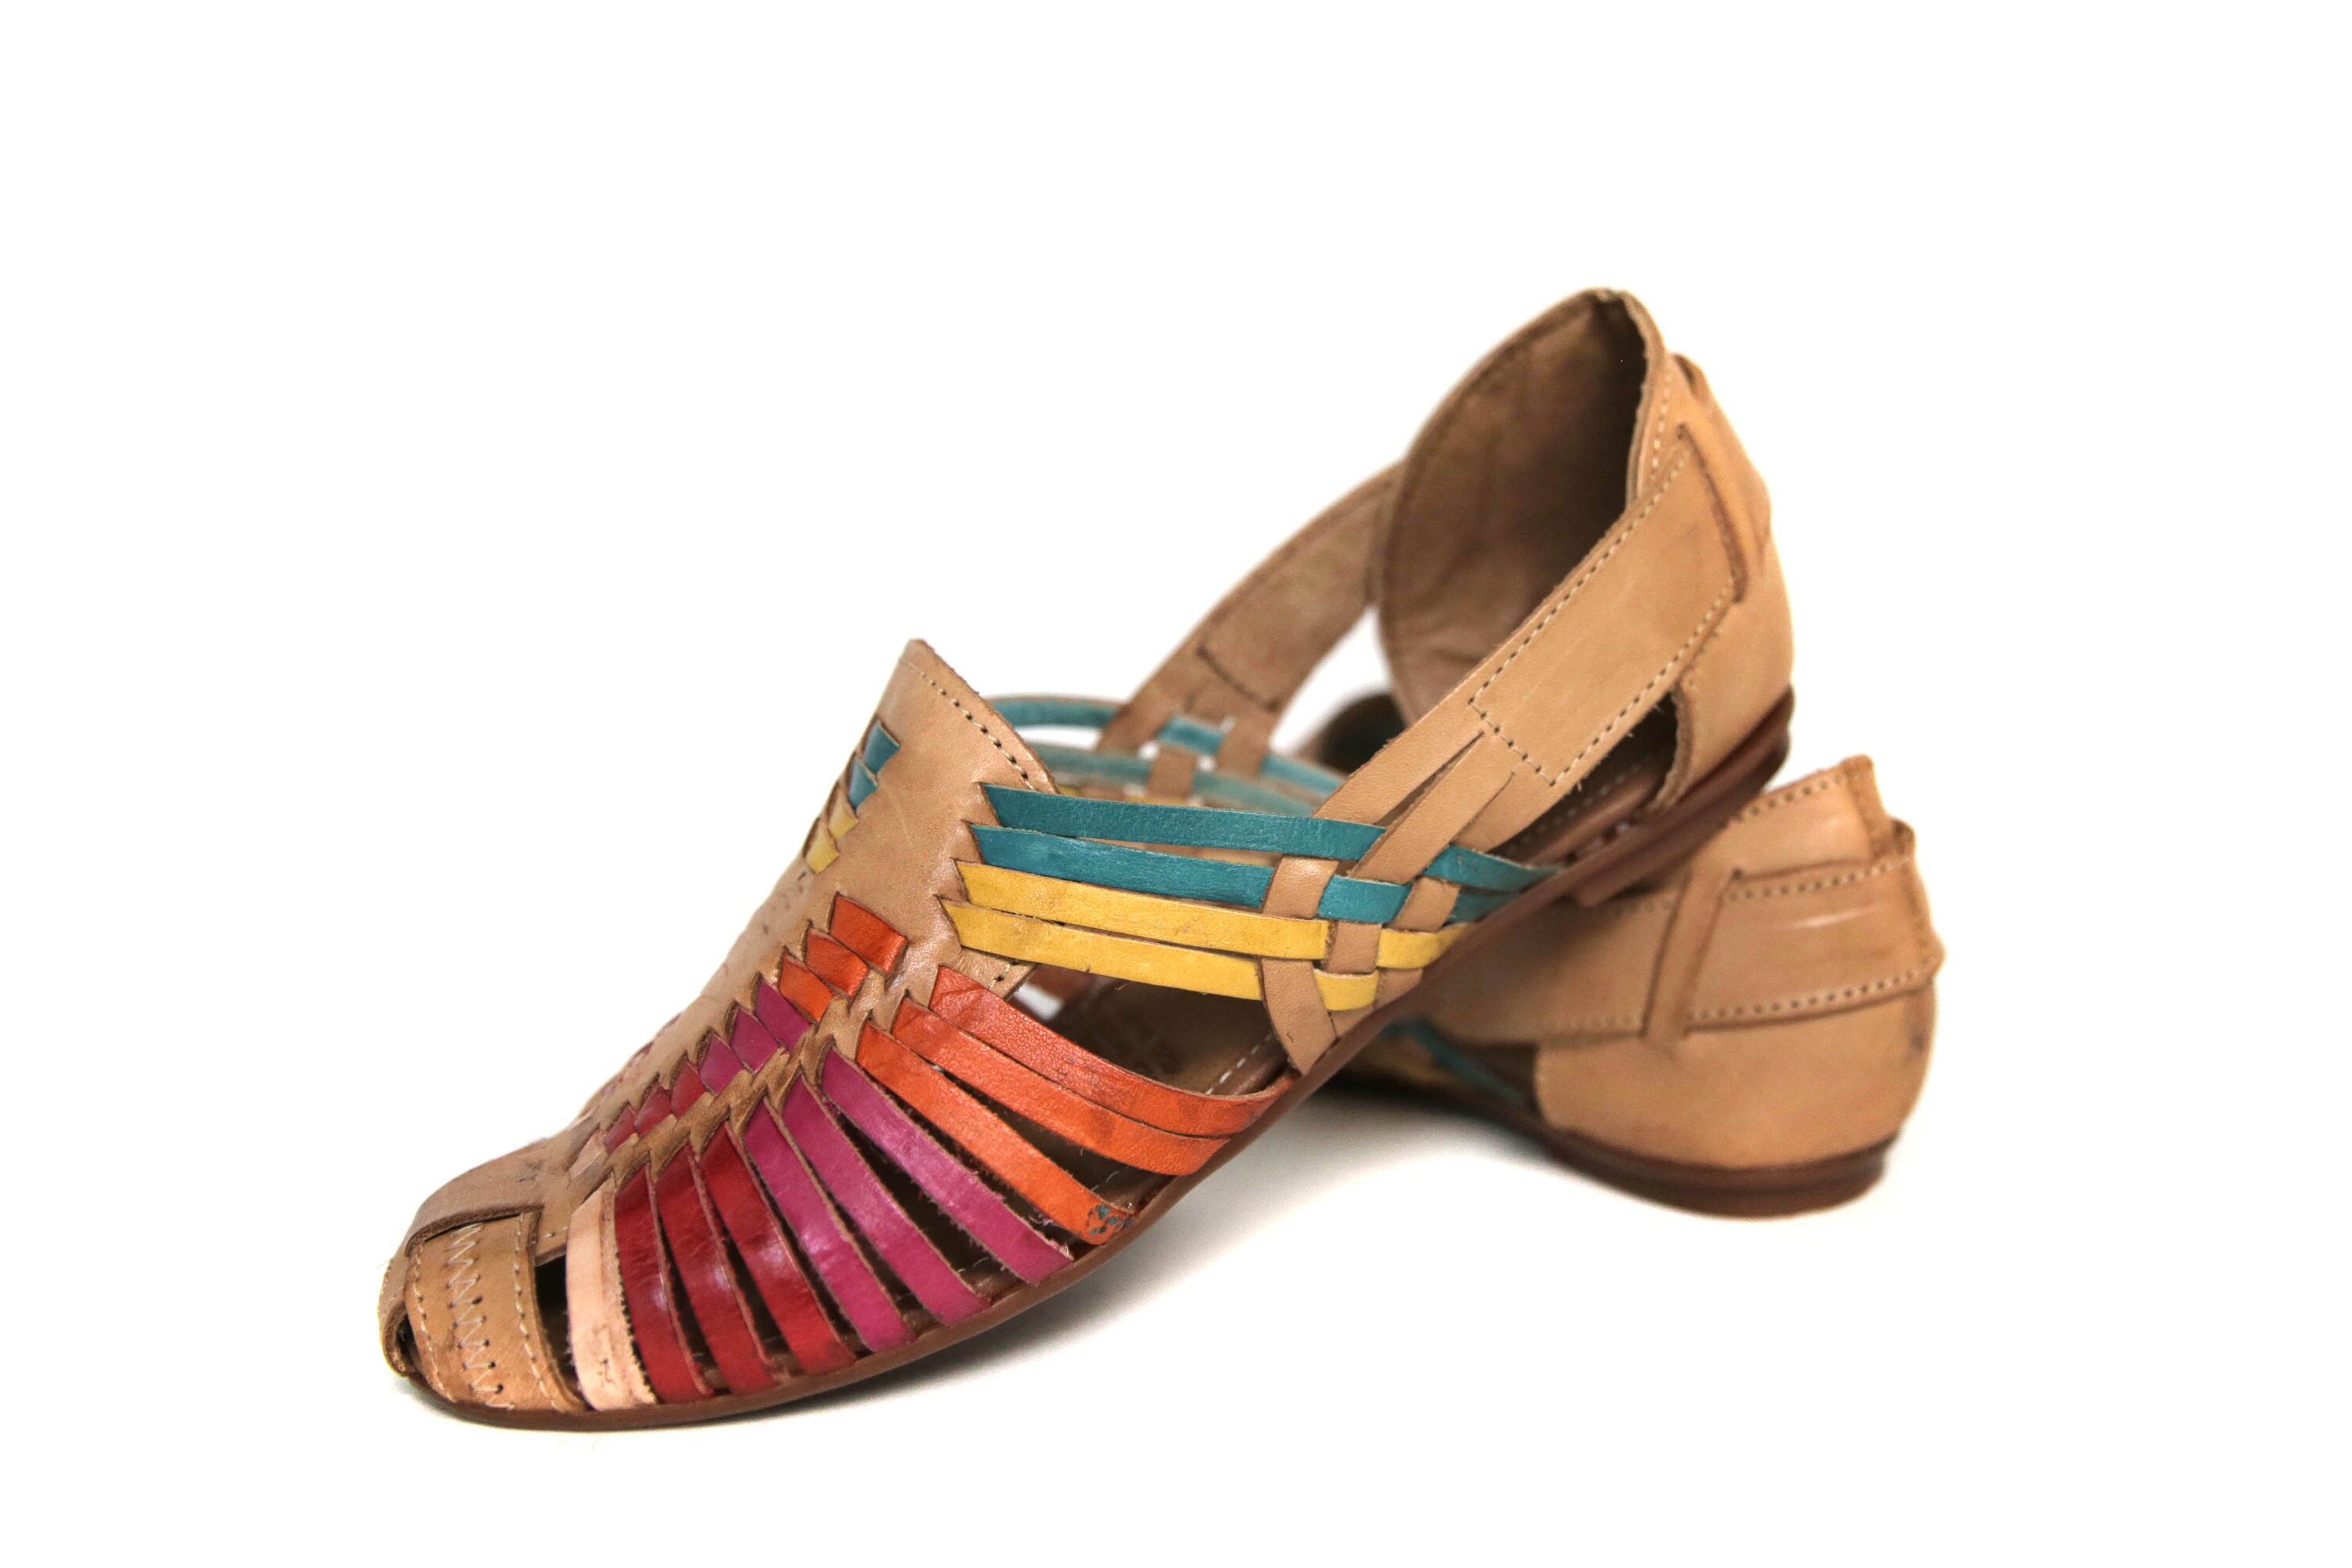 WOMEN'S CLOSED Toe Colorful Weave Mexican Sandals MULTI - Etsy